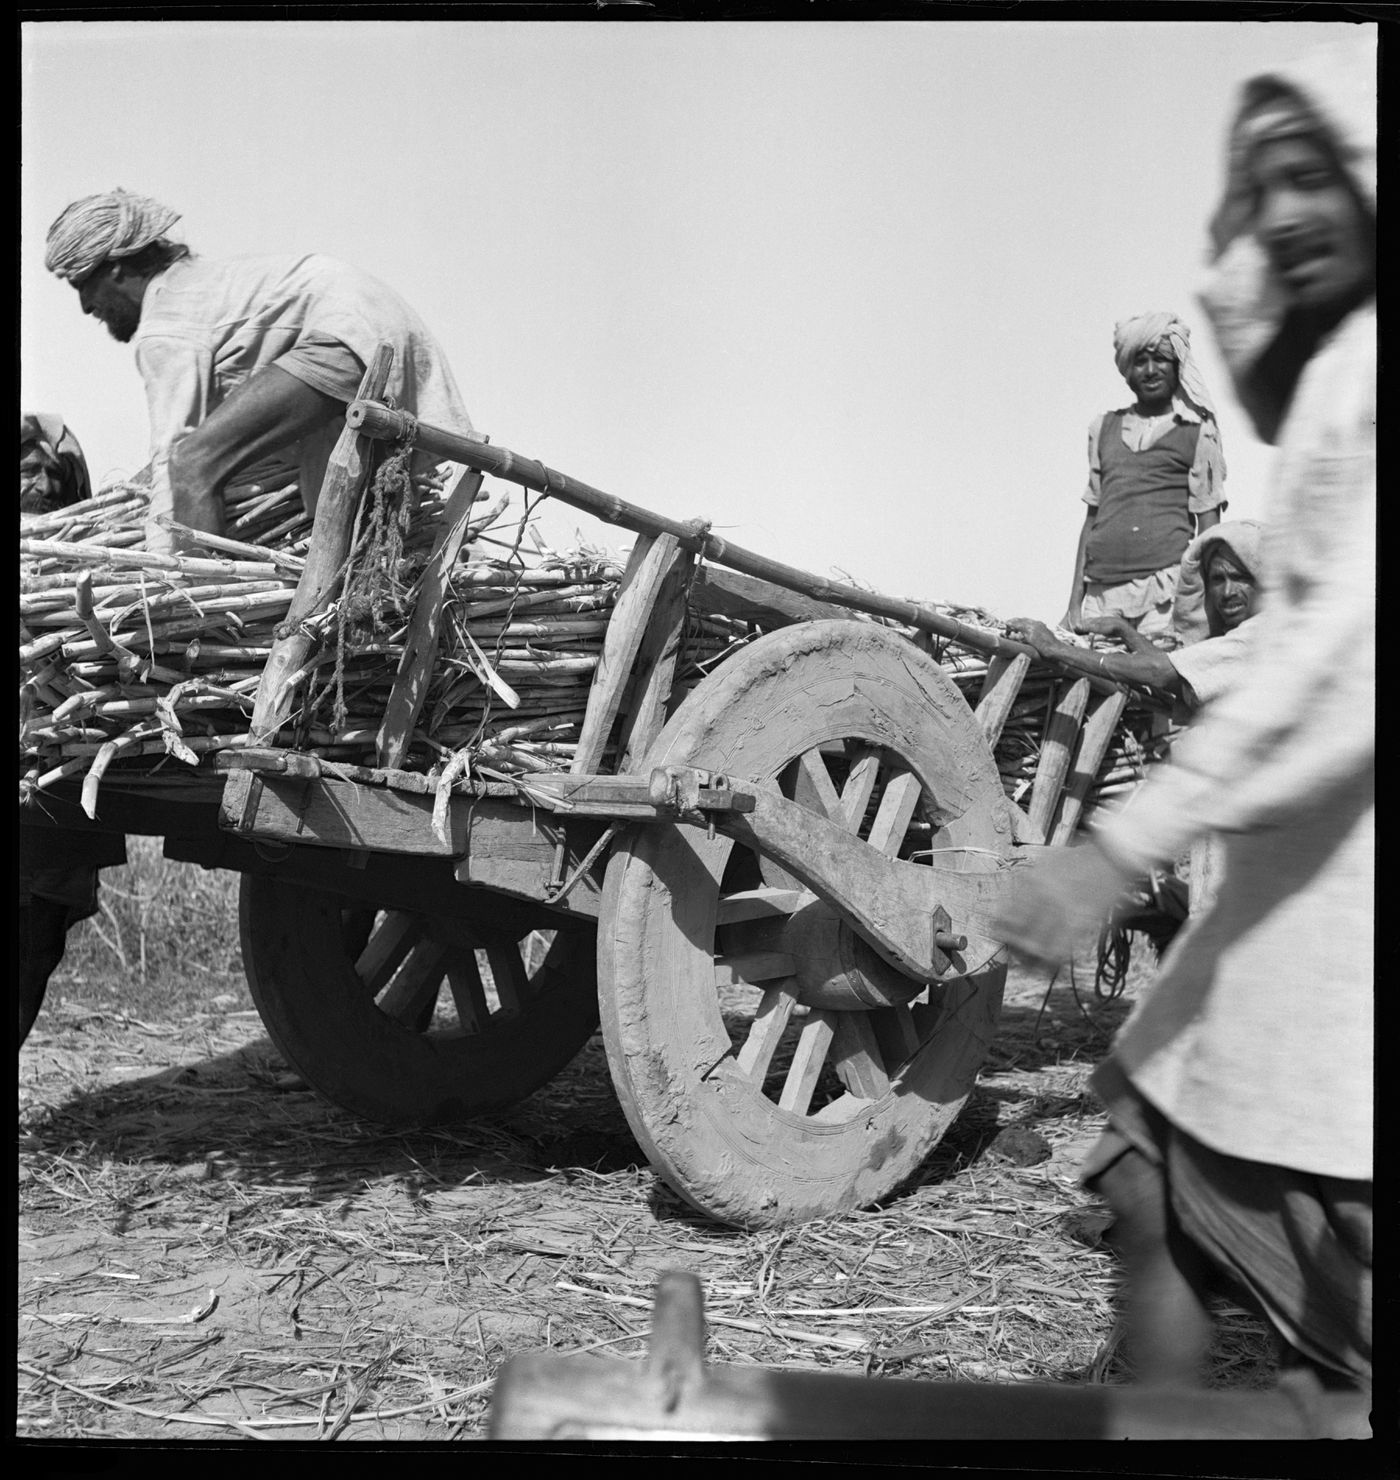 Men around a cart in Chandigarh's area before the construction, India